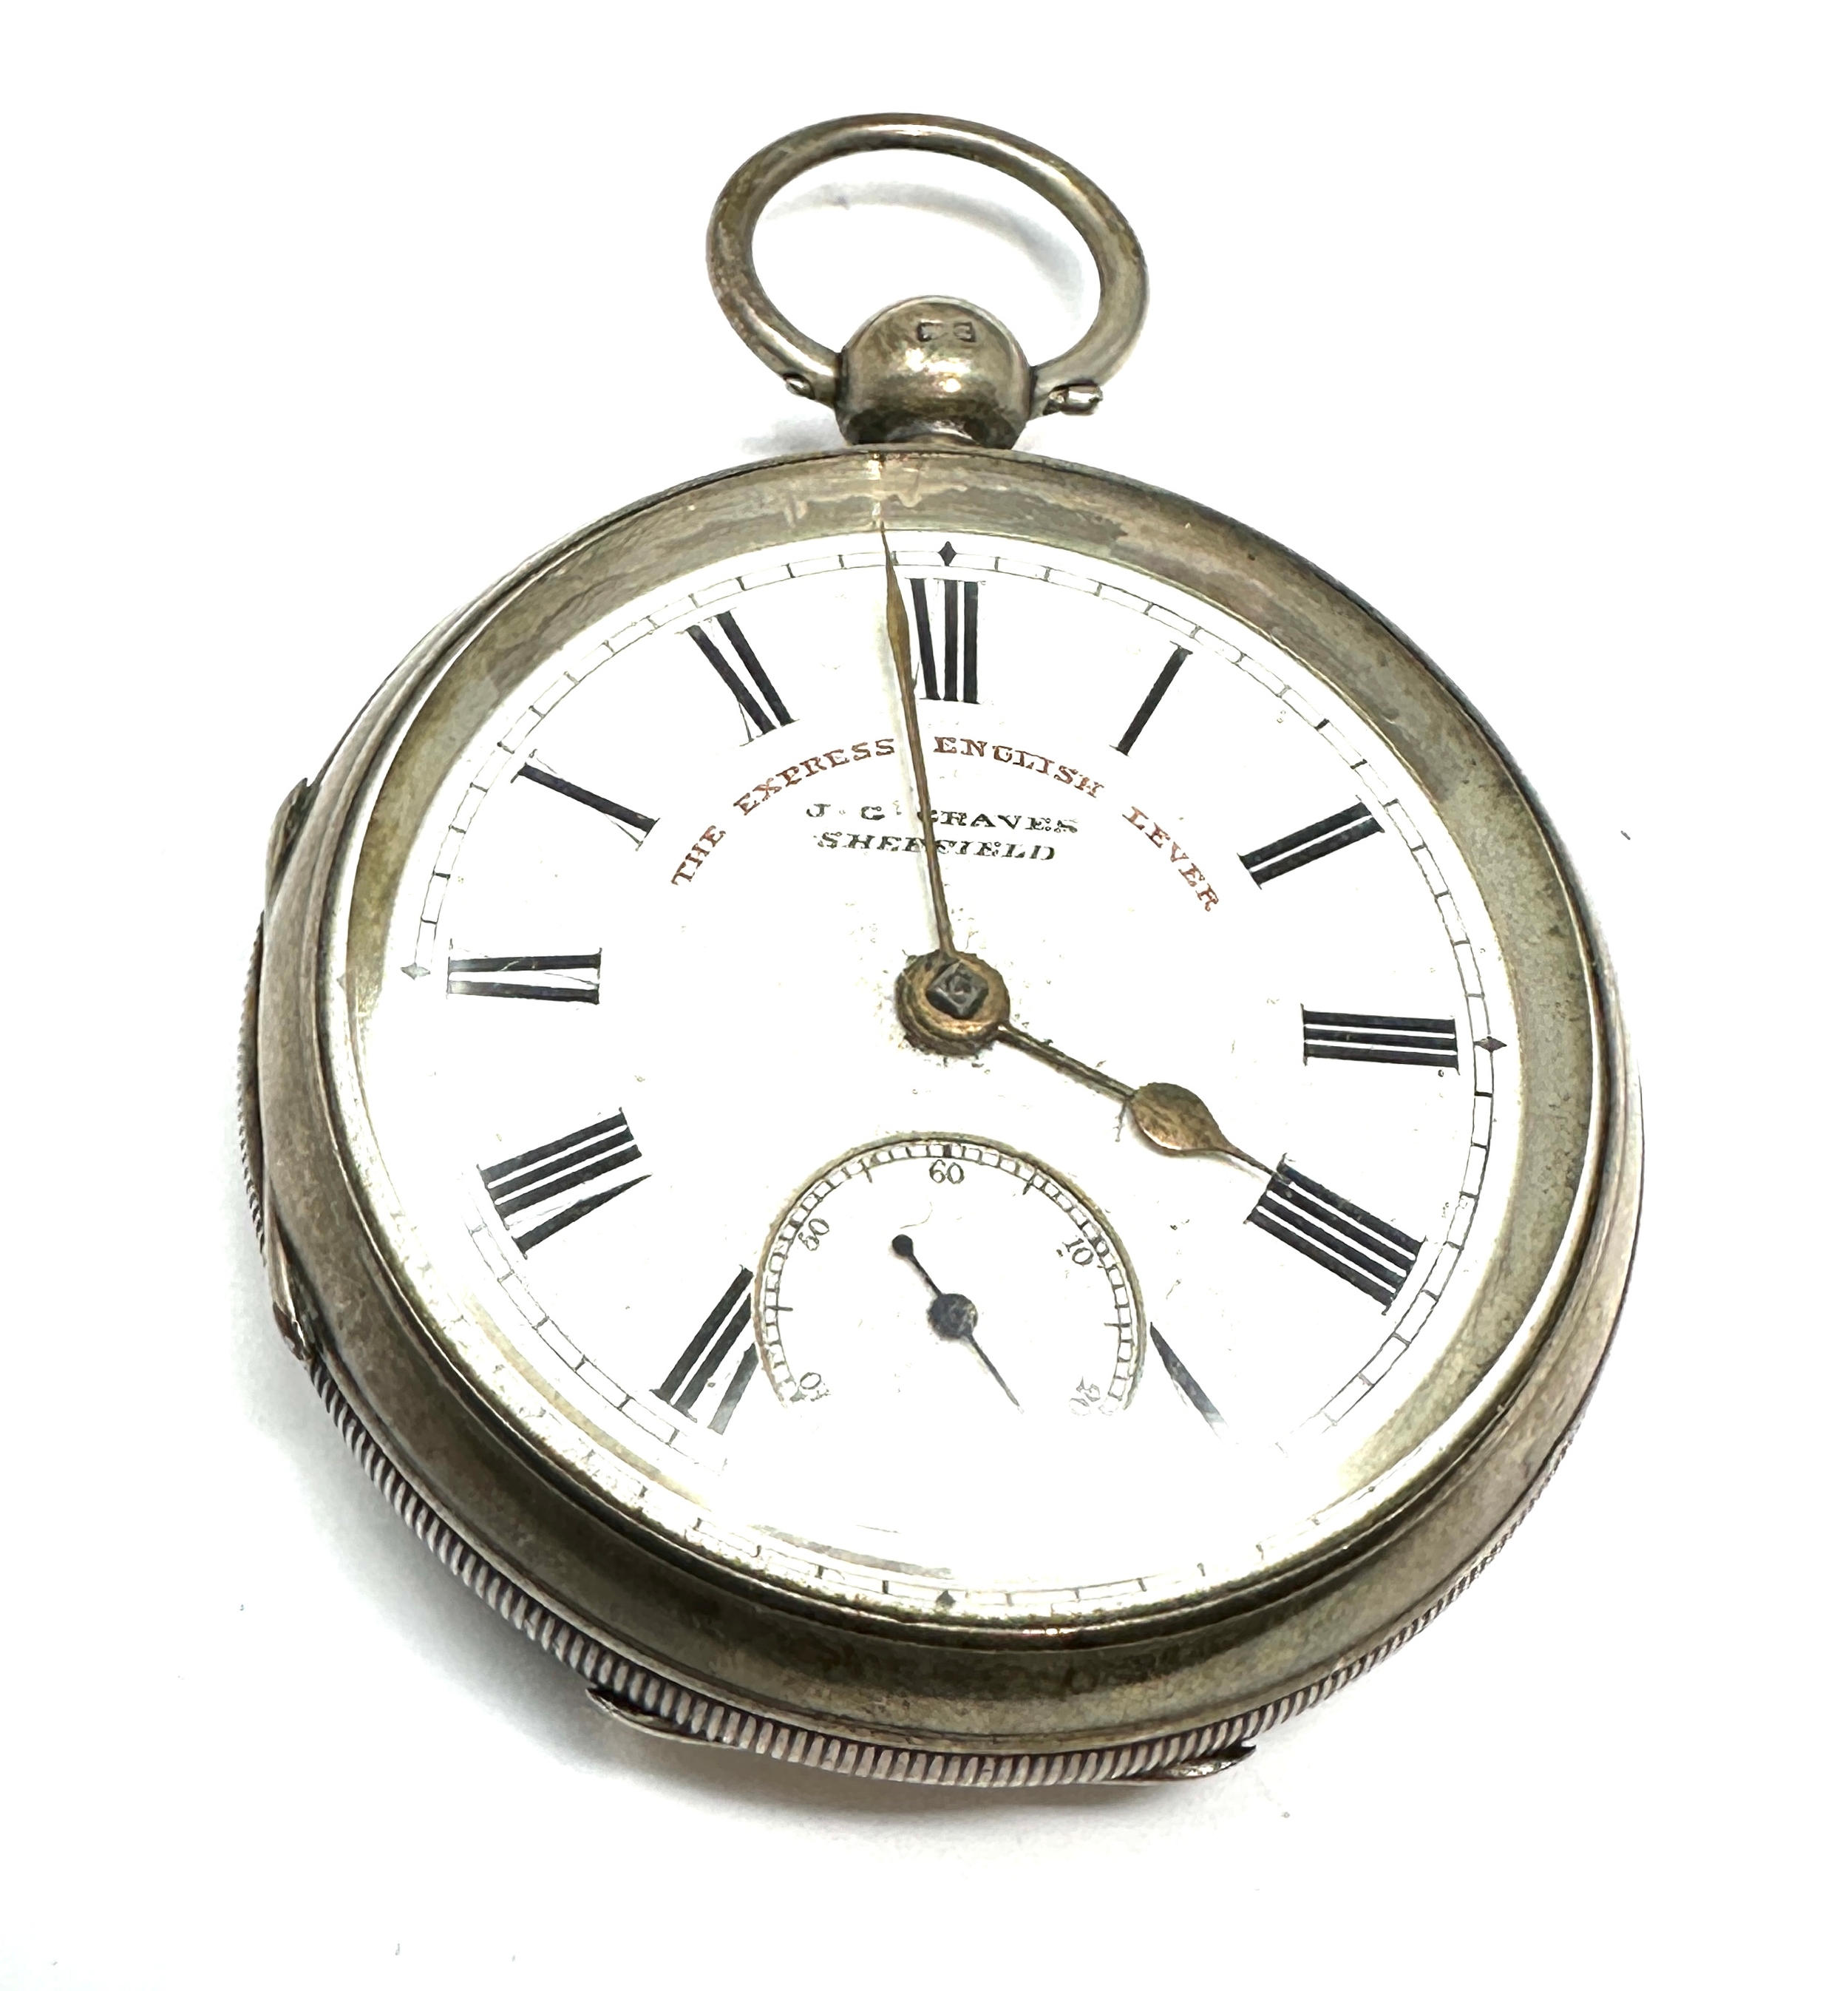 Antique silver open face pocket watch j.g graves sheffield the watch is not ticking